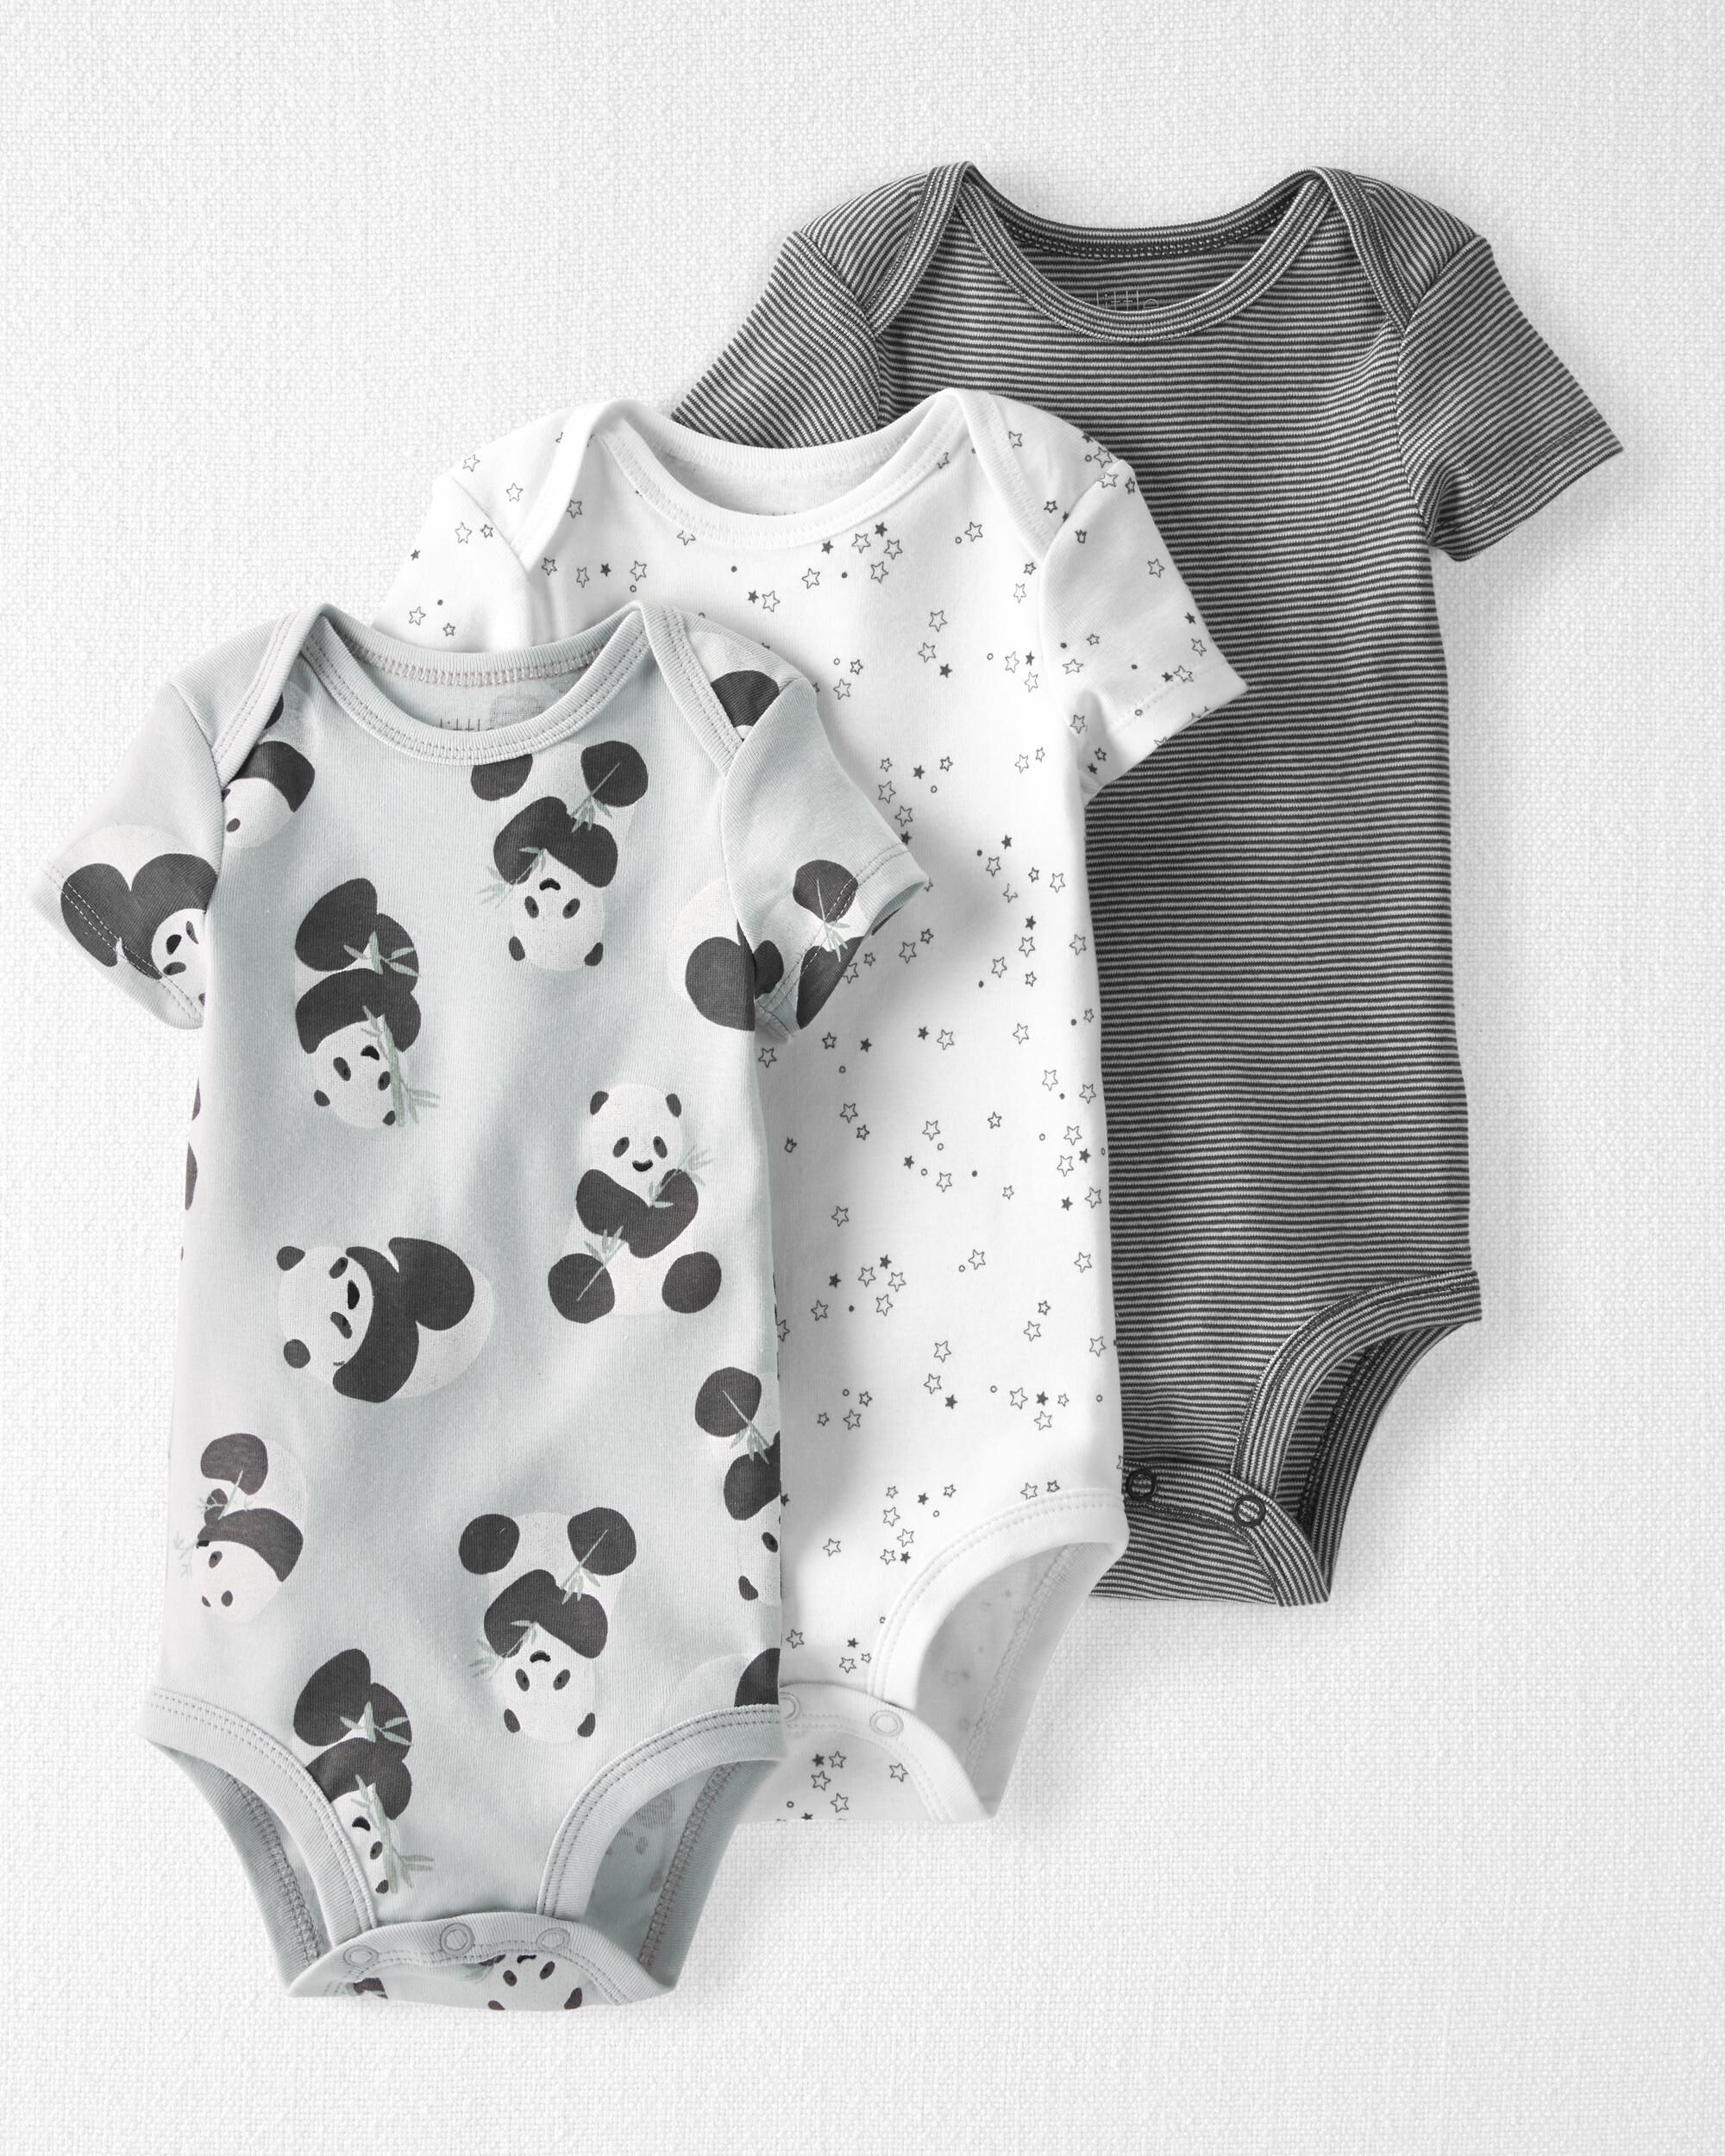 Carters 3-Pack Organic Cotton Bodysuits